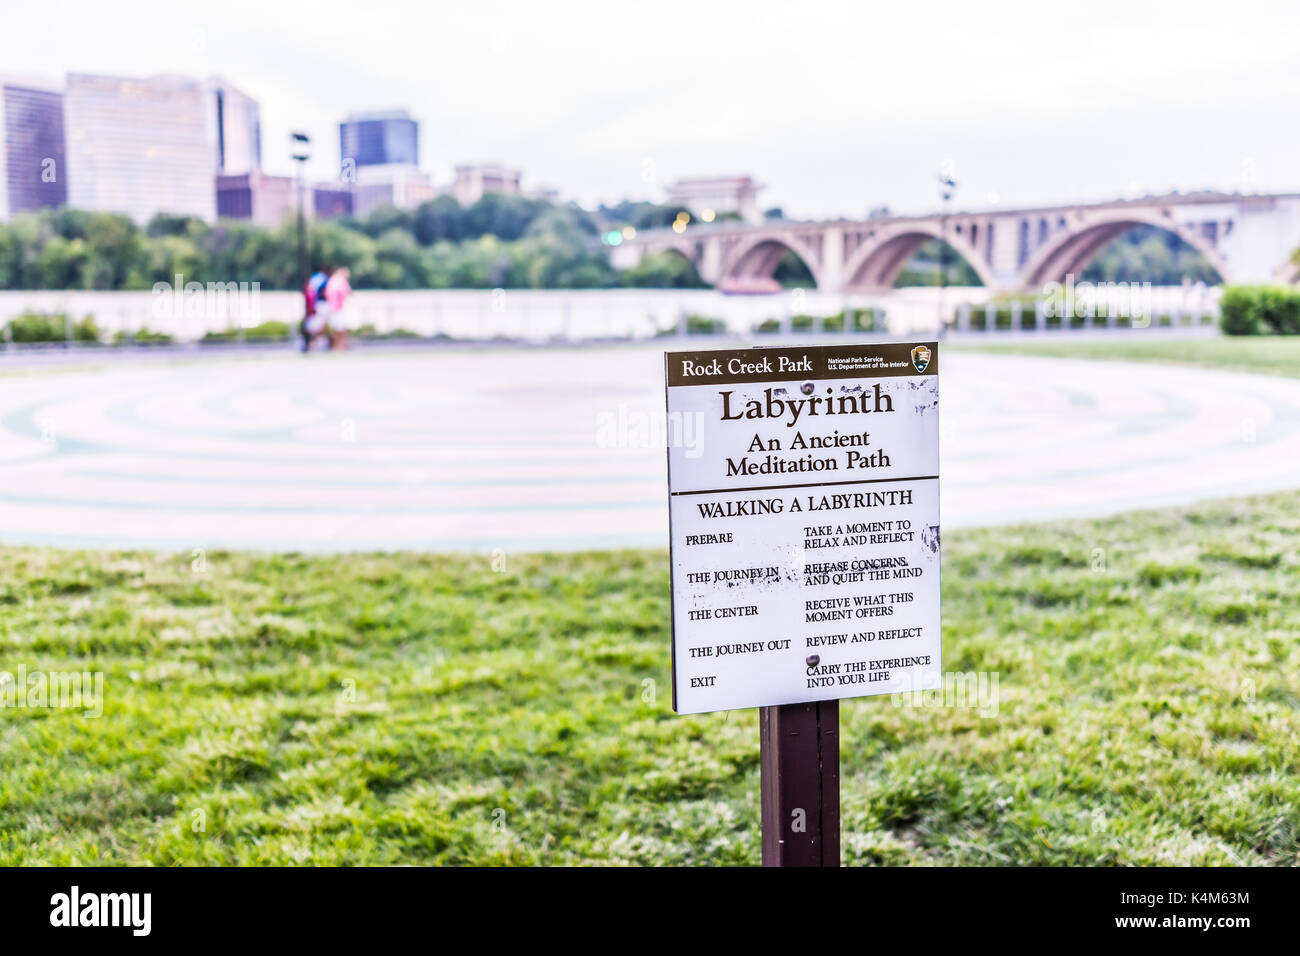 Washington DC, USA - August 4, 2017: Rock Creek Park Labyrinth sign by Potomac river, key bridge and Arlington cityscape in evening downtown Georgetow Stock Photo